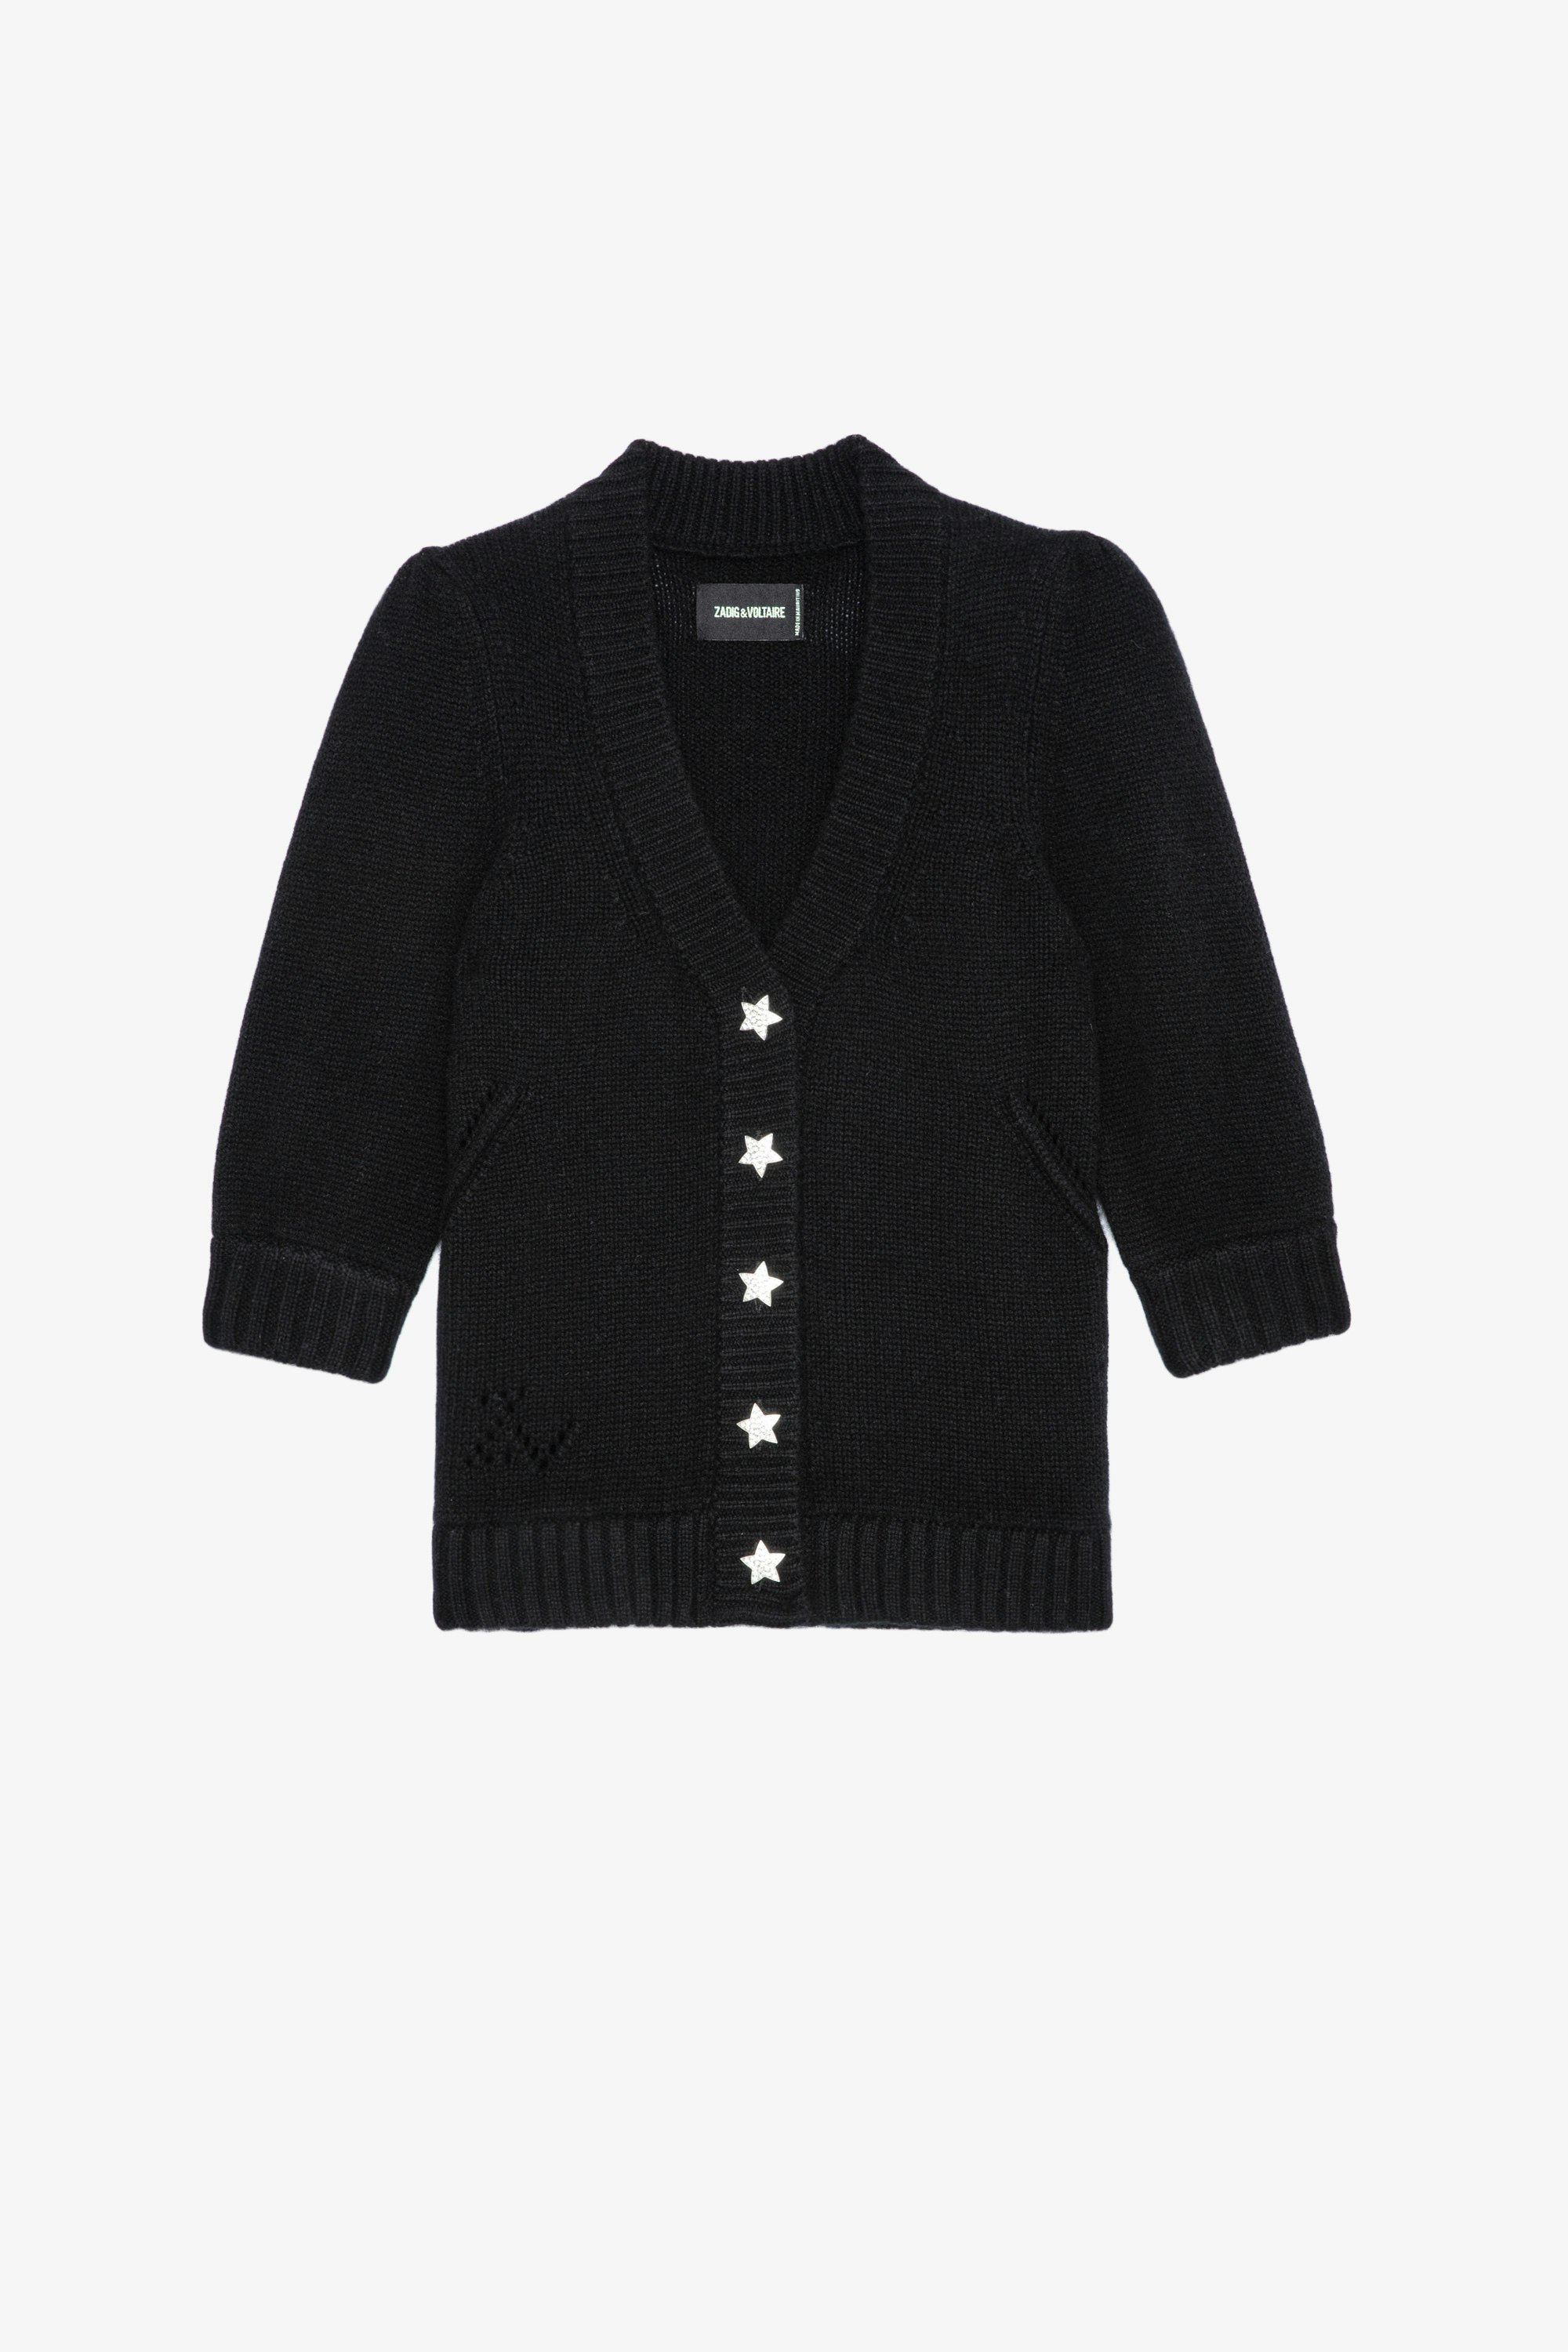 Betsy カシミヤカーディガン Women’s black cashmere cardigan with full sleeves